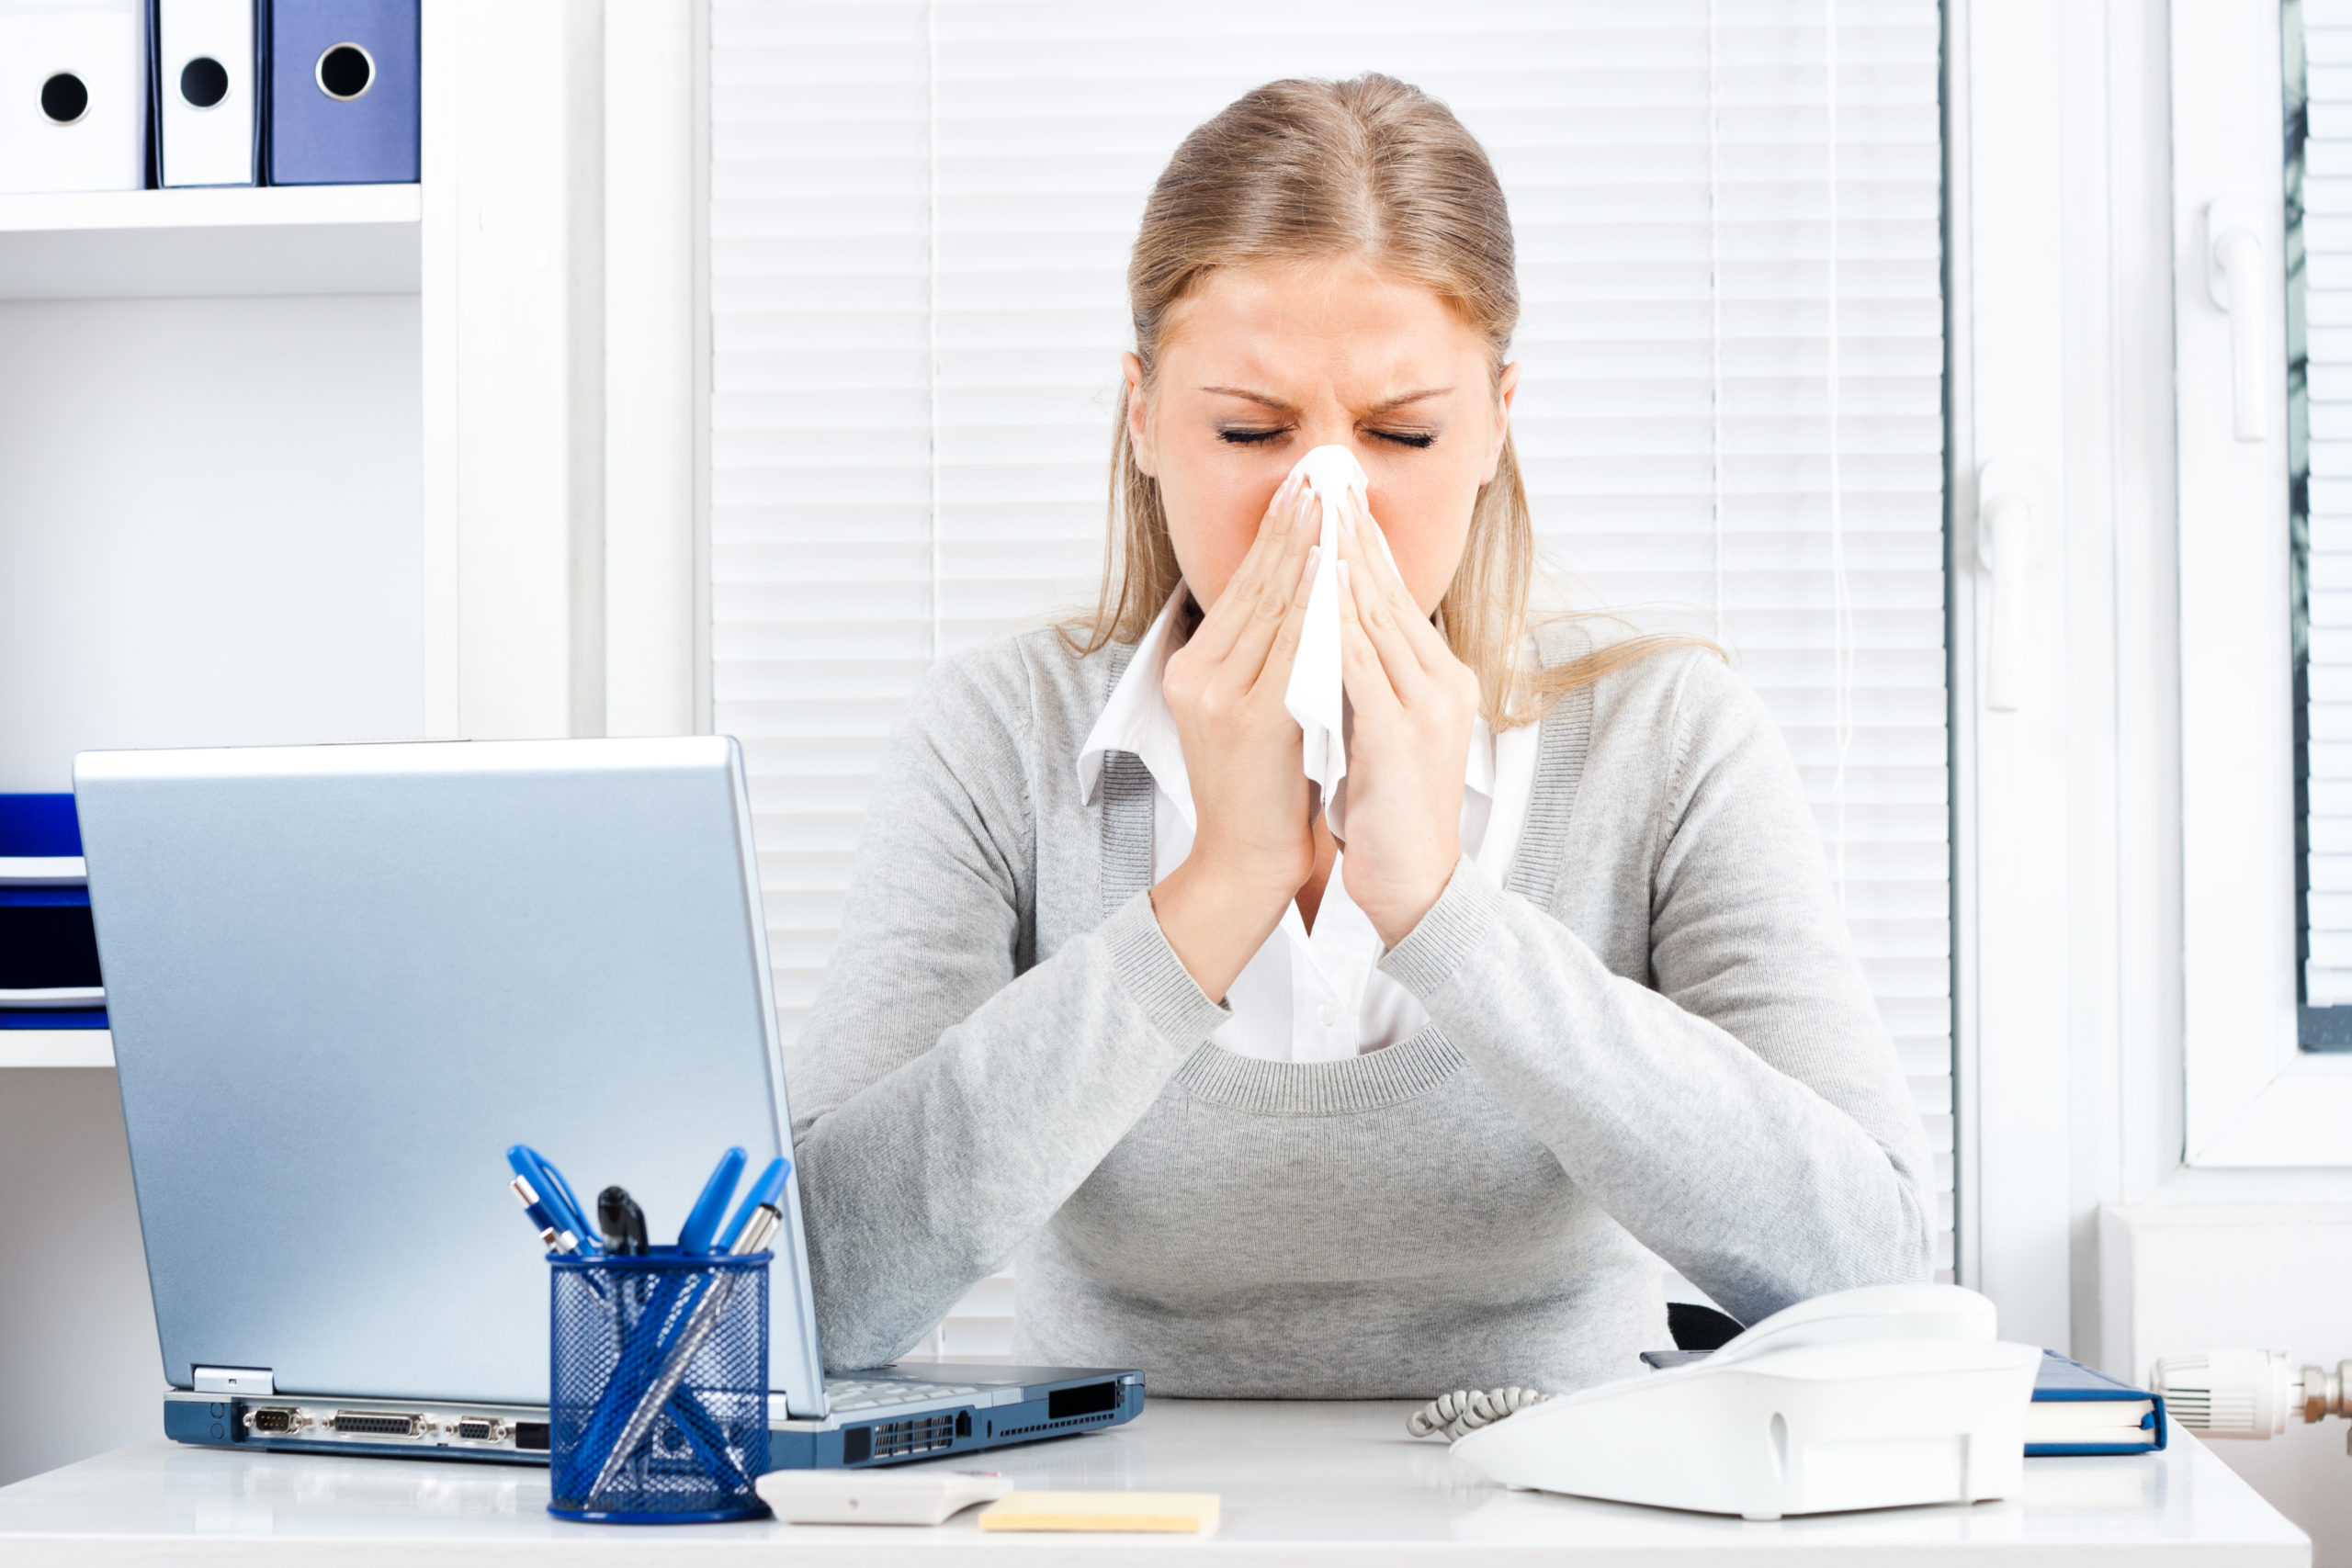 How to navigate the flu, COVID and fertility - Flu, COVID and fertility safety tips